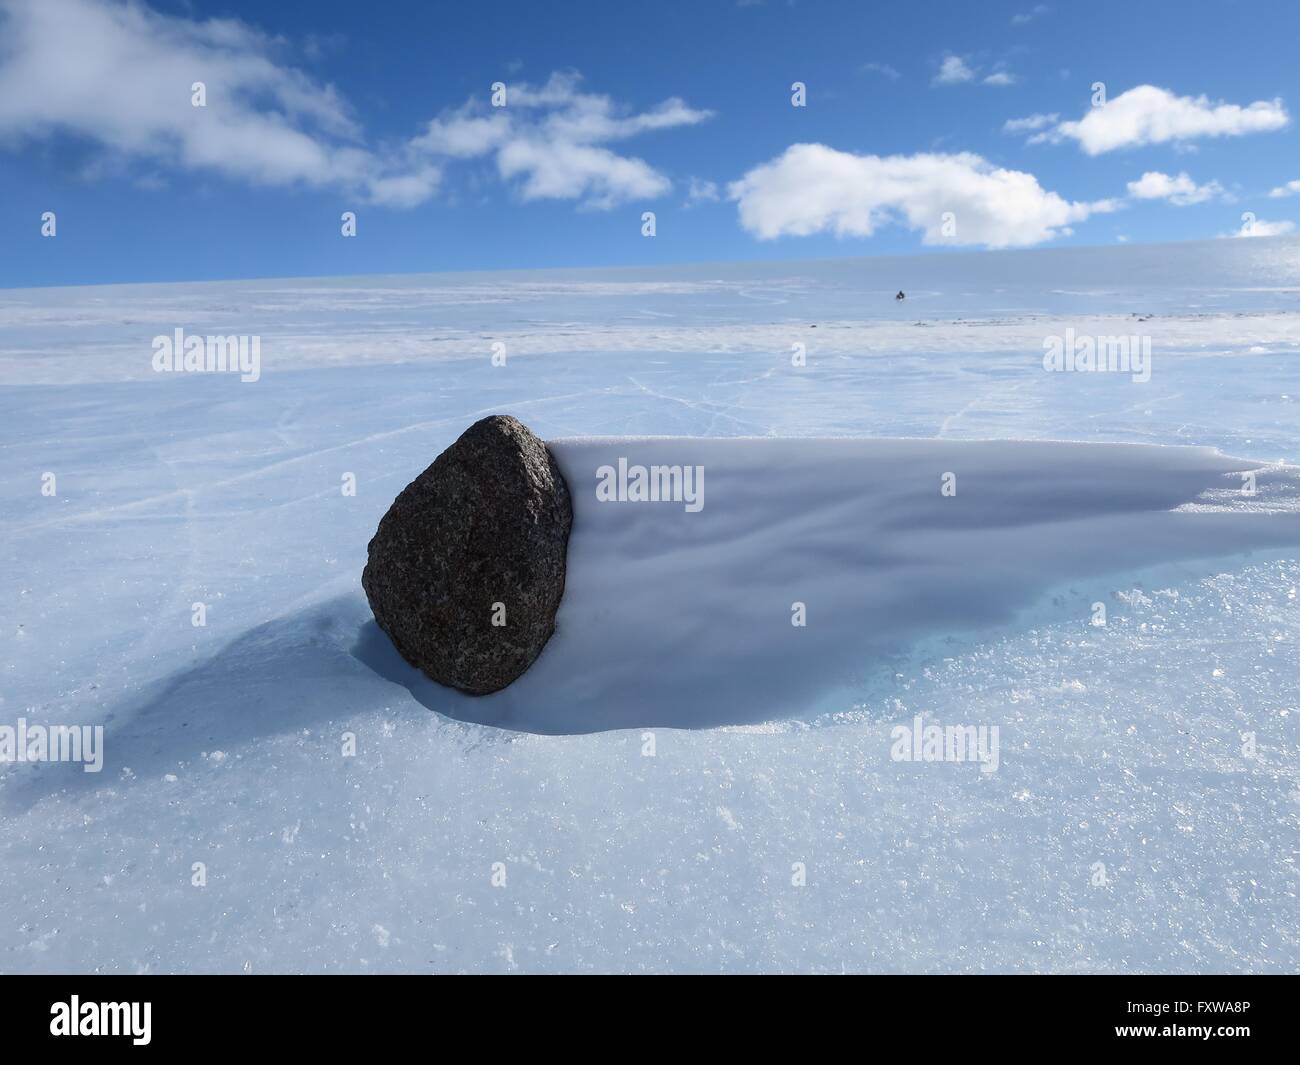 A meteorite sits on the blue ice field in the Miller Range December 19, 2015 in Antarctica. Scientists collected 570 meteorite samples during a two-month expedition as part of the Antarctic Search for Meteorites program. Stock Photo